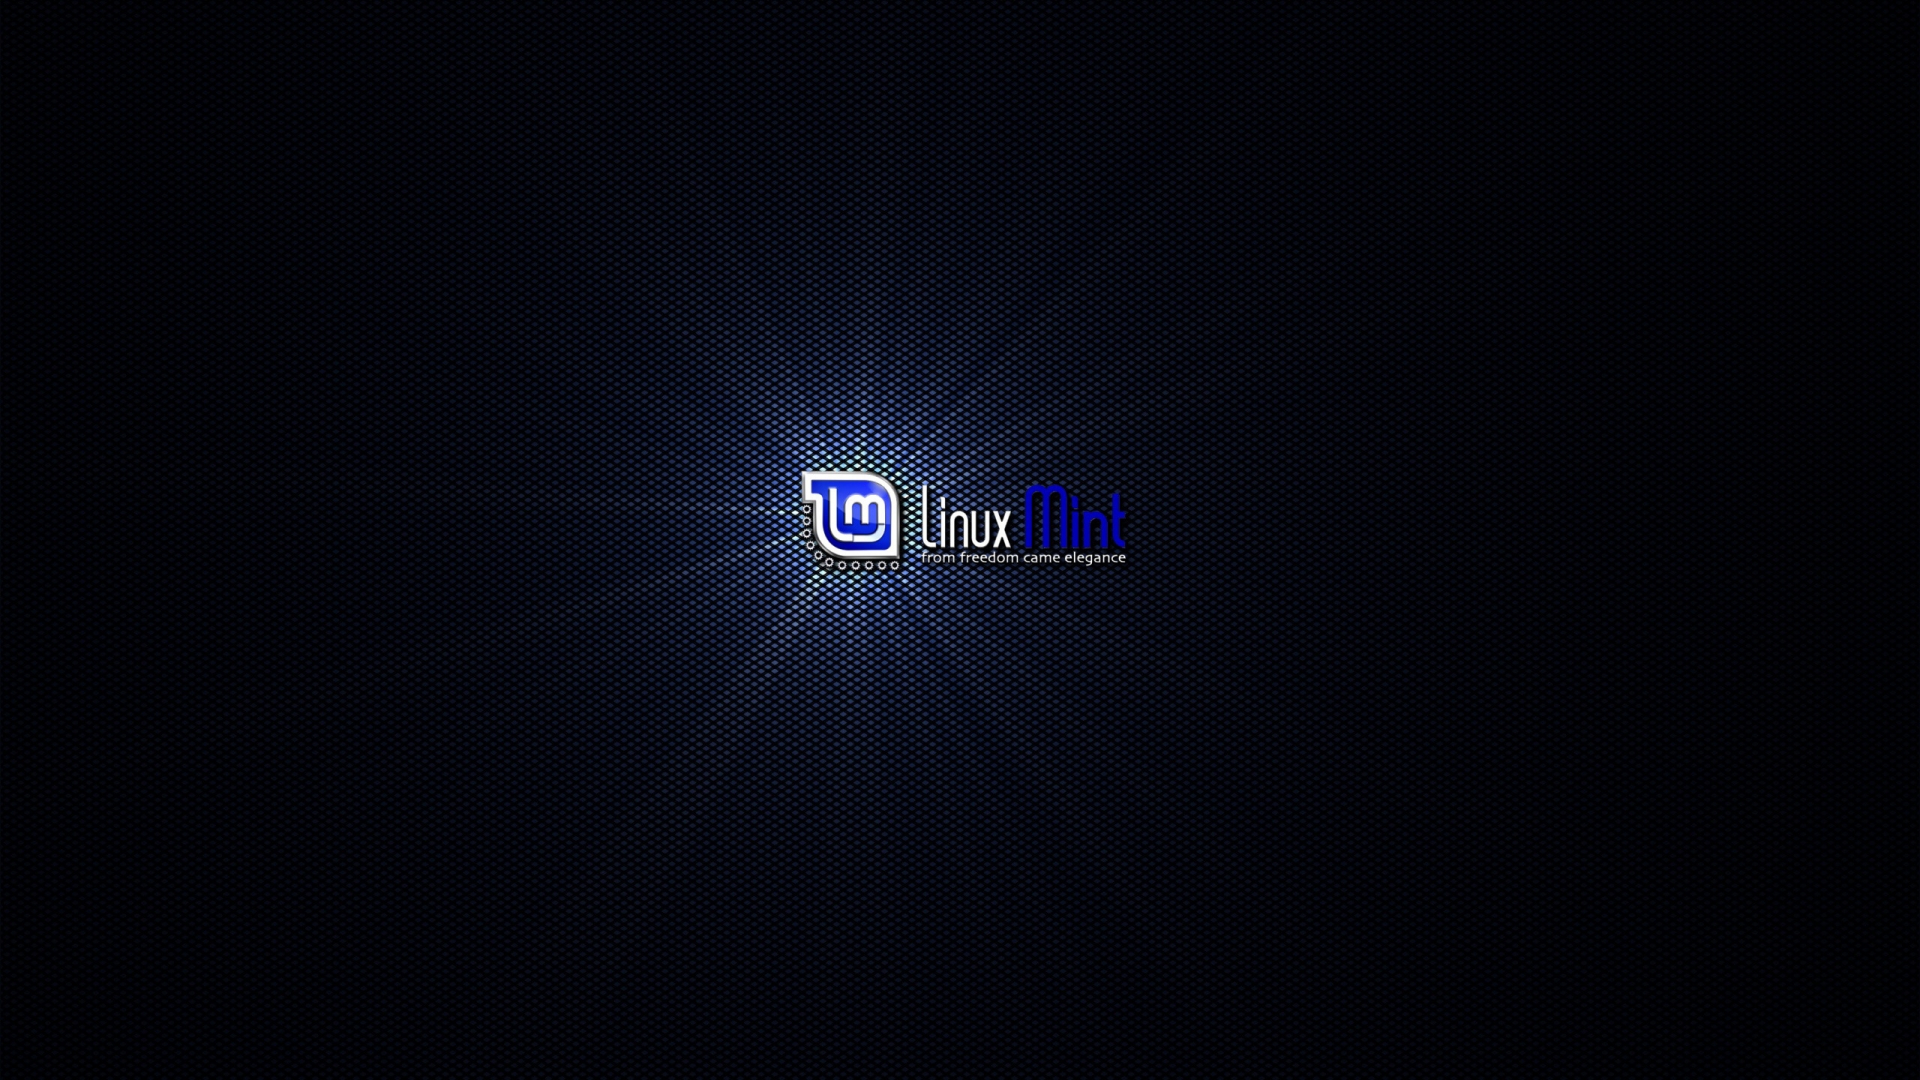 Blue mint Linux for 1920 x 1080 HDTV 1080p resolution